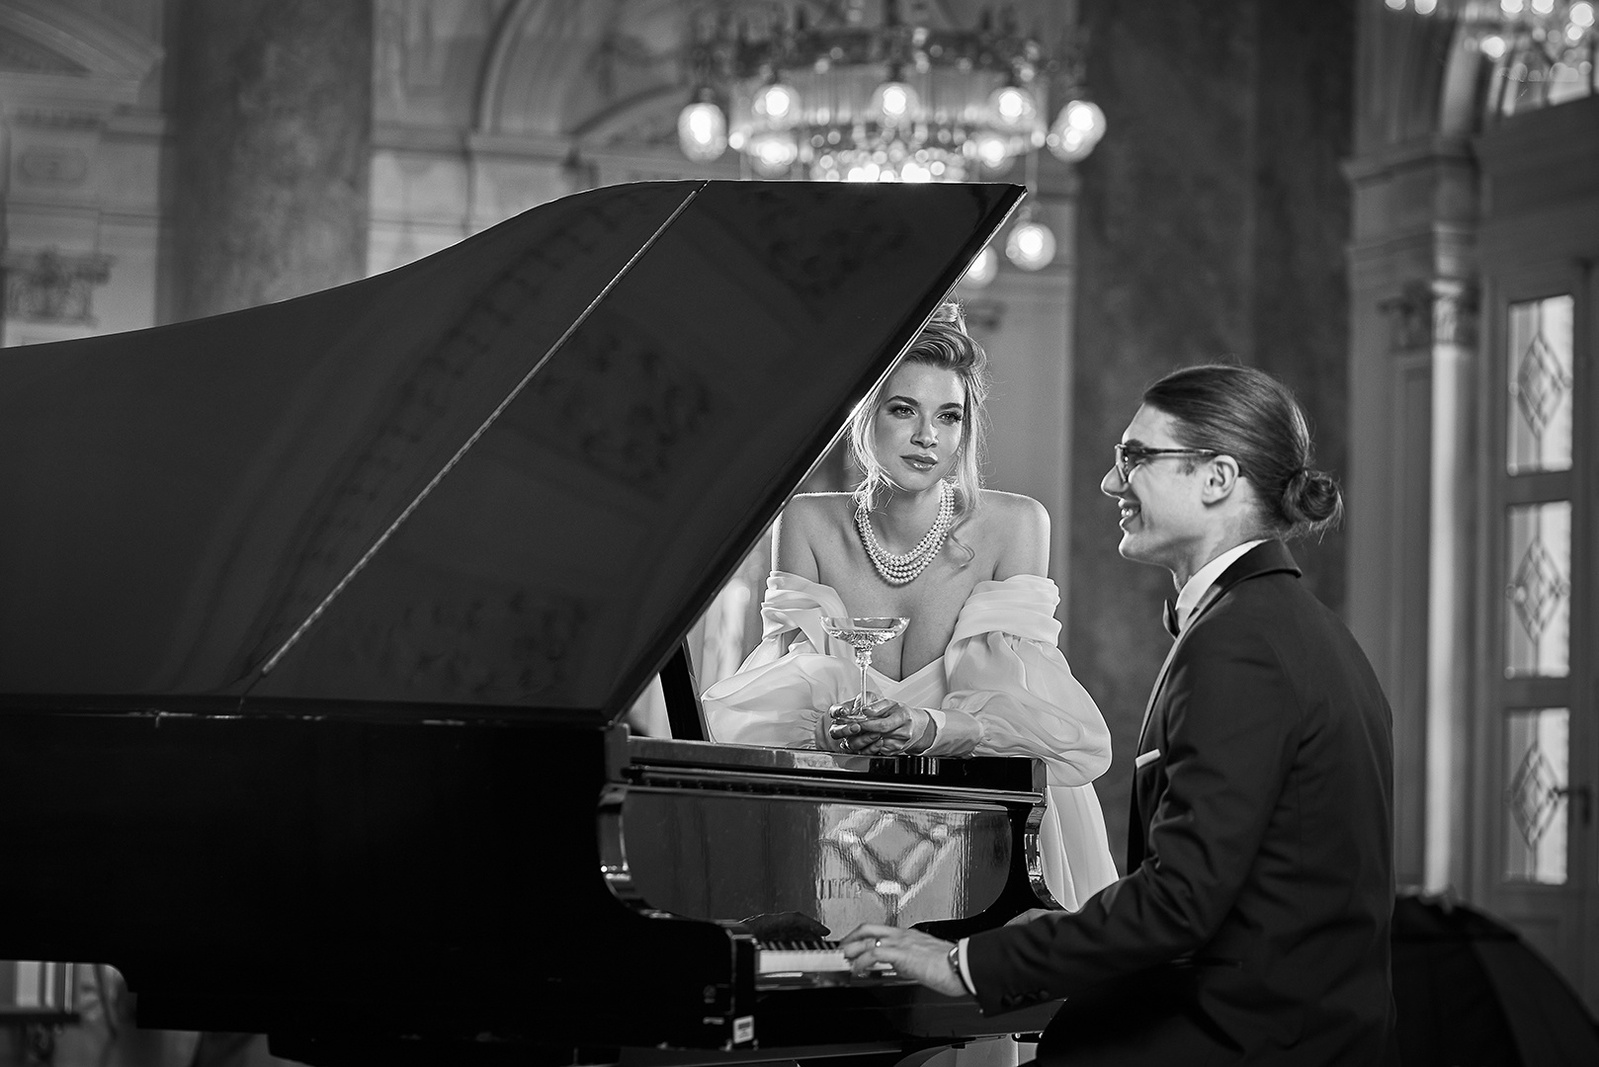 Bride and groom enjoying themselves in romantic atmosphere by piano, black and white photography